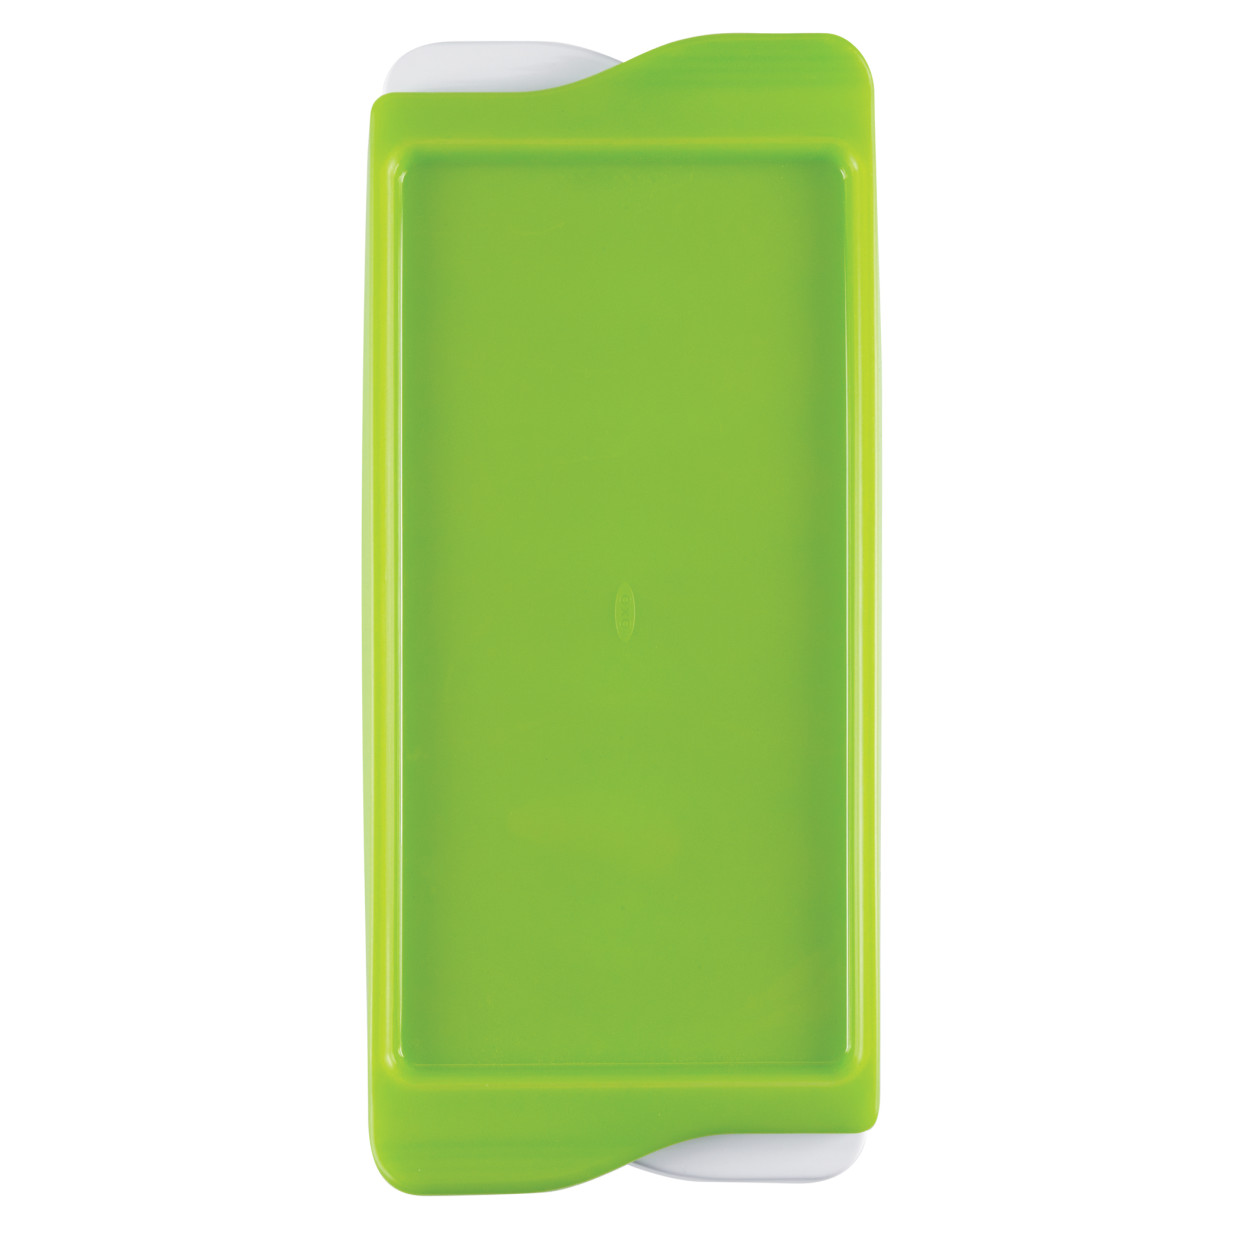 OXO Tot Baby Food Freezer Tray with Protective Cover - Green, 1.